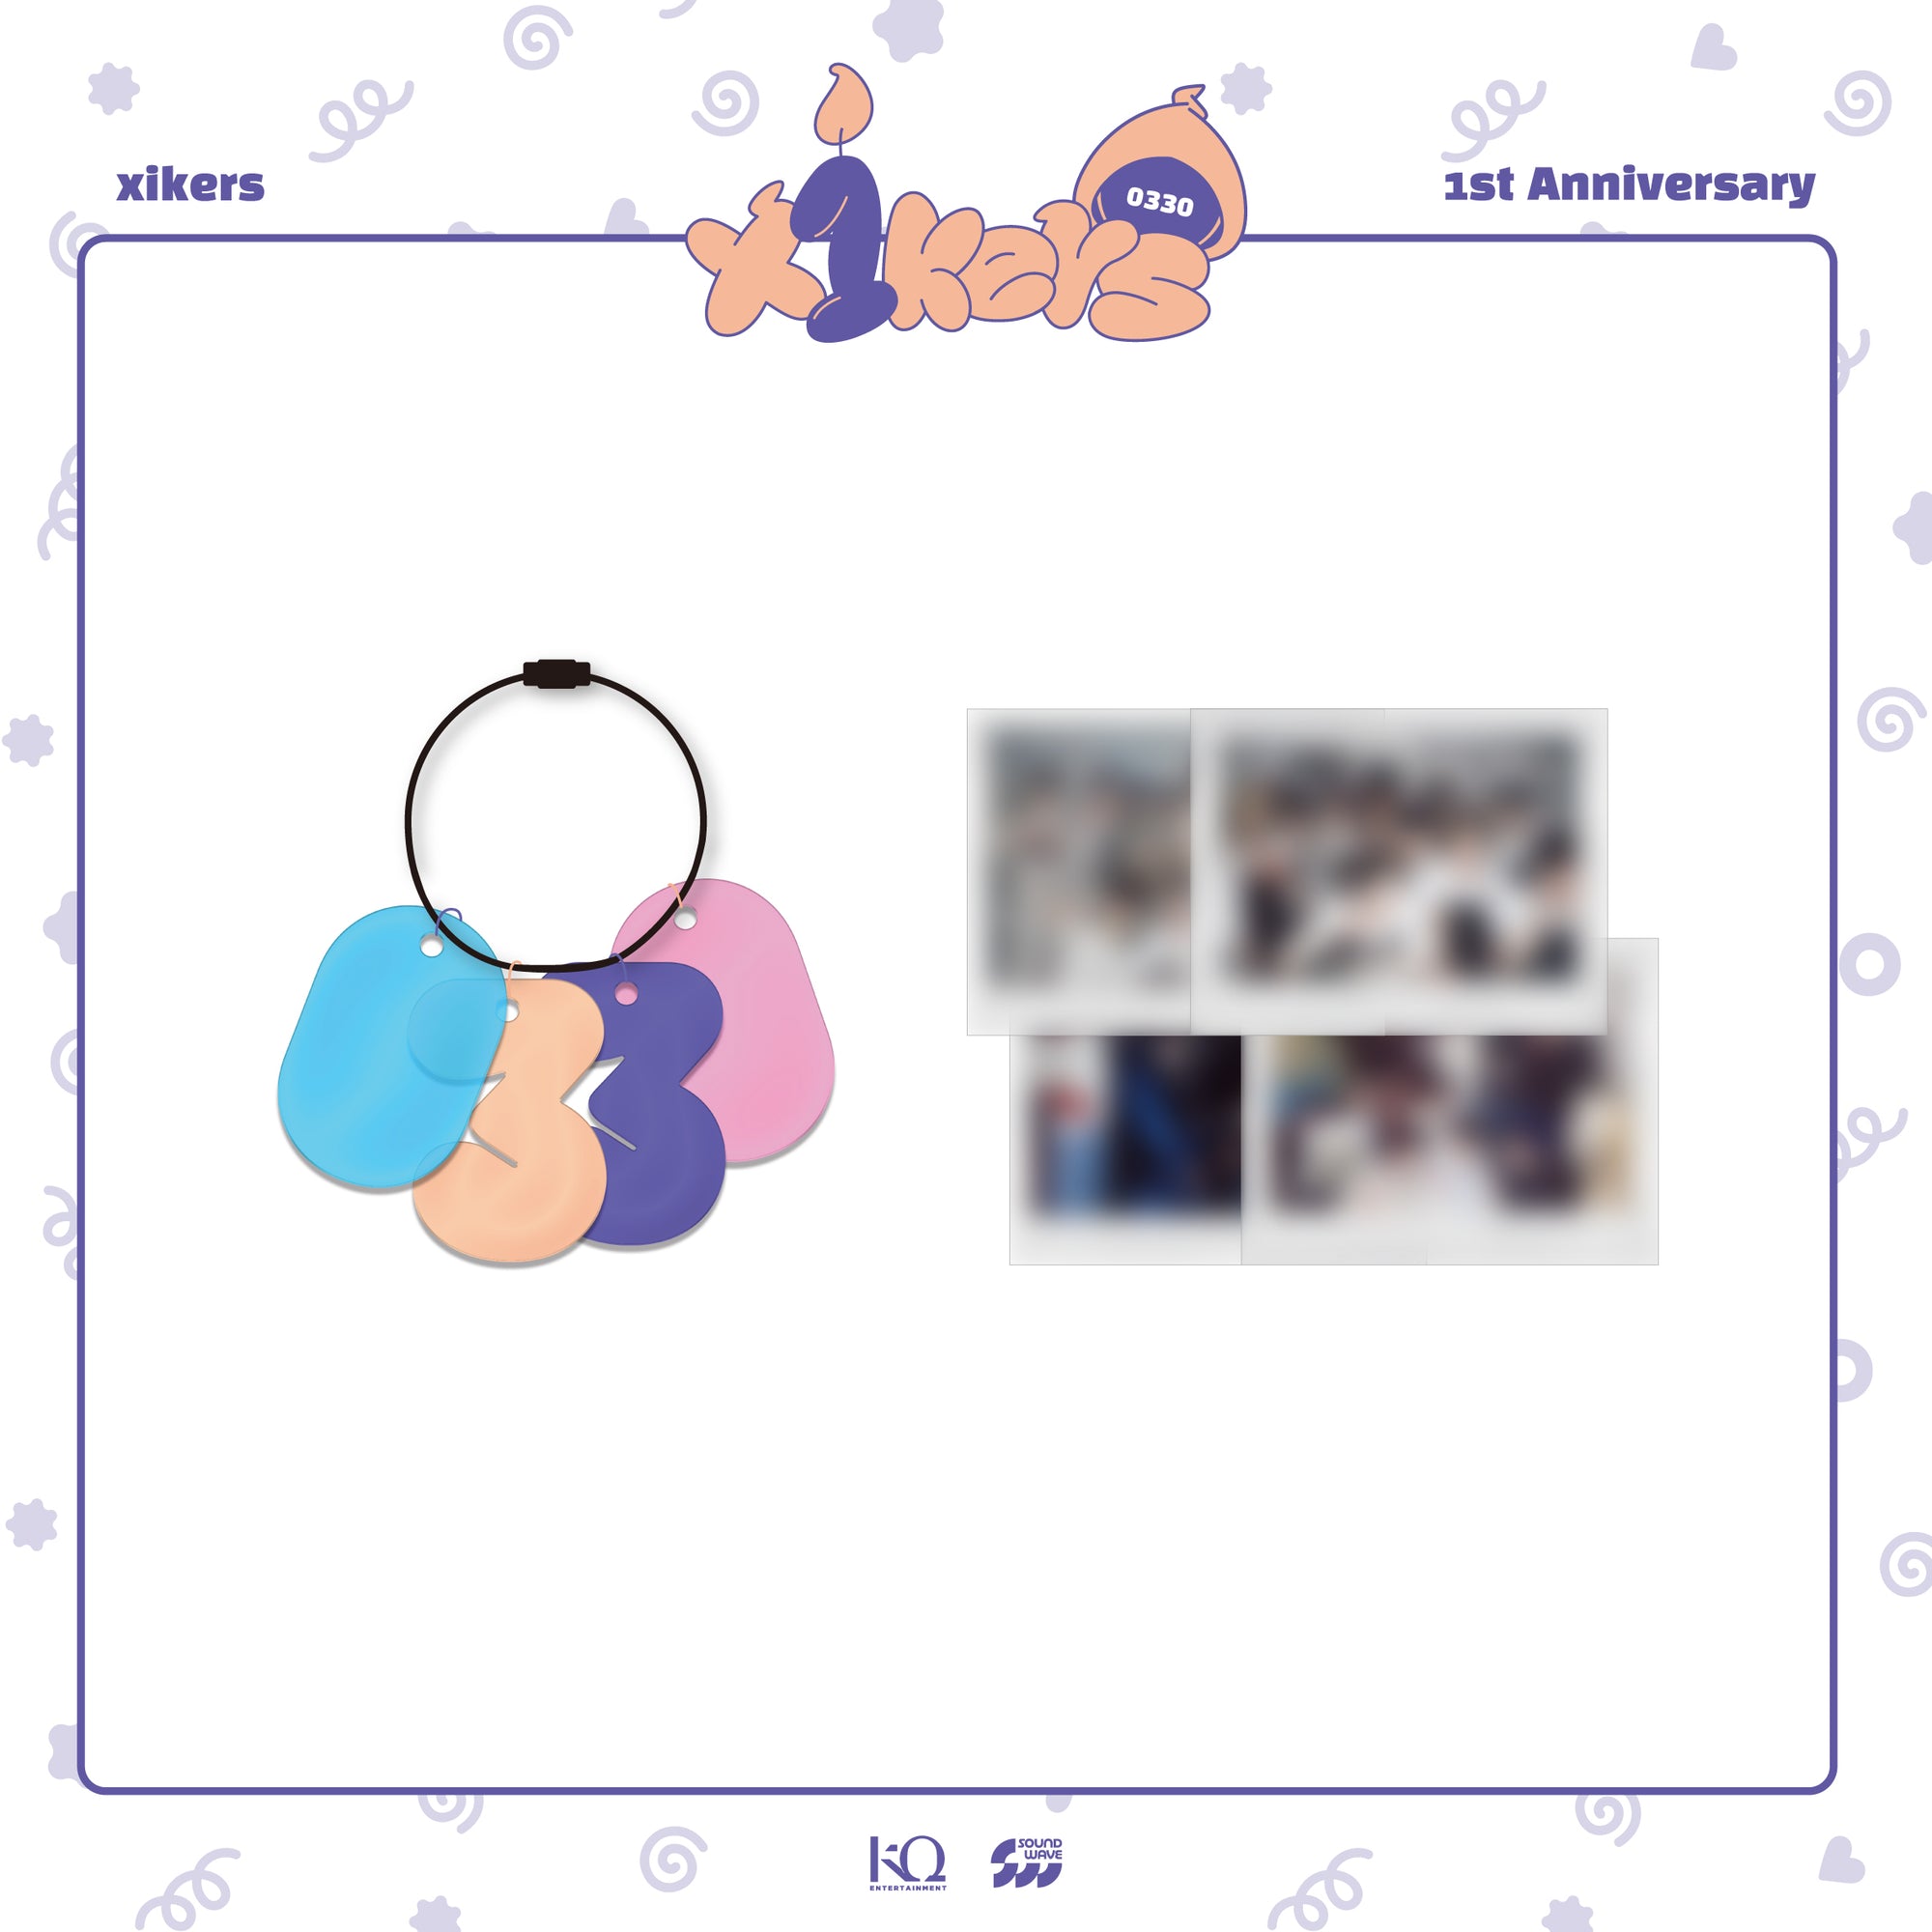 XIKERS - 'x1kers' 1ST ANNIVERSARY OFFICIAL MD 0330 ACRYLIC KEYRING